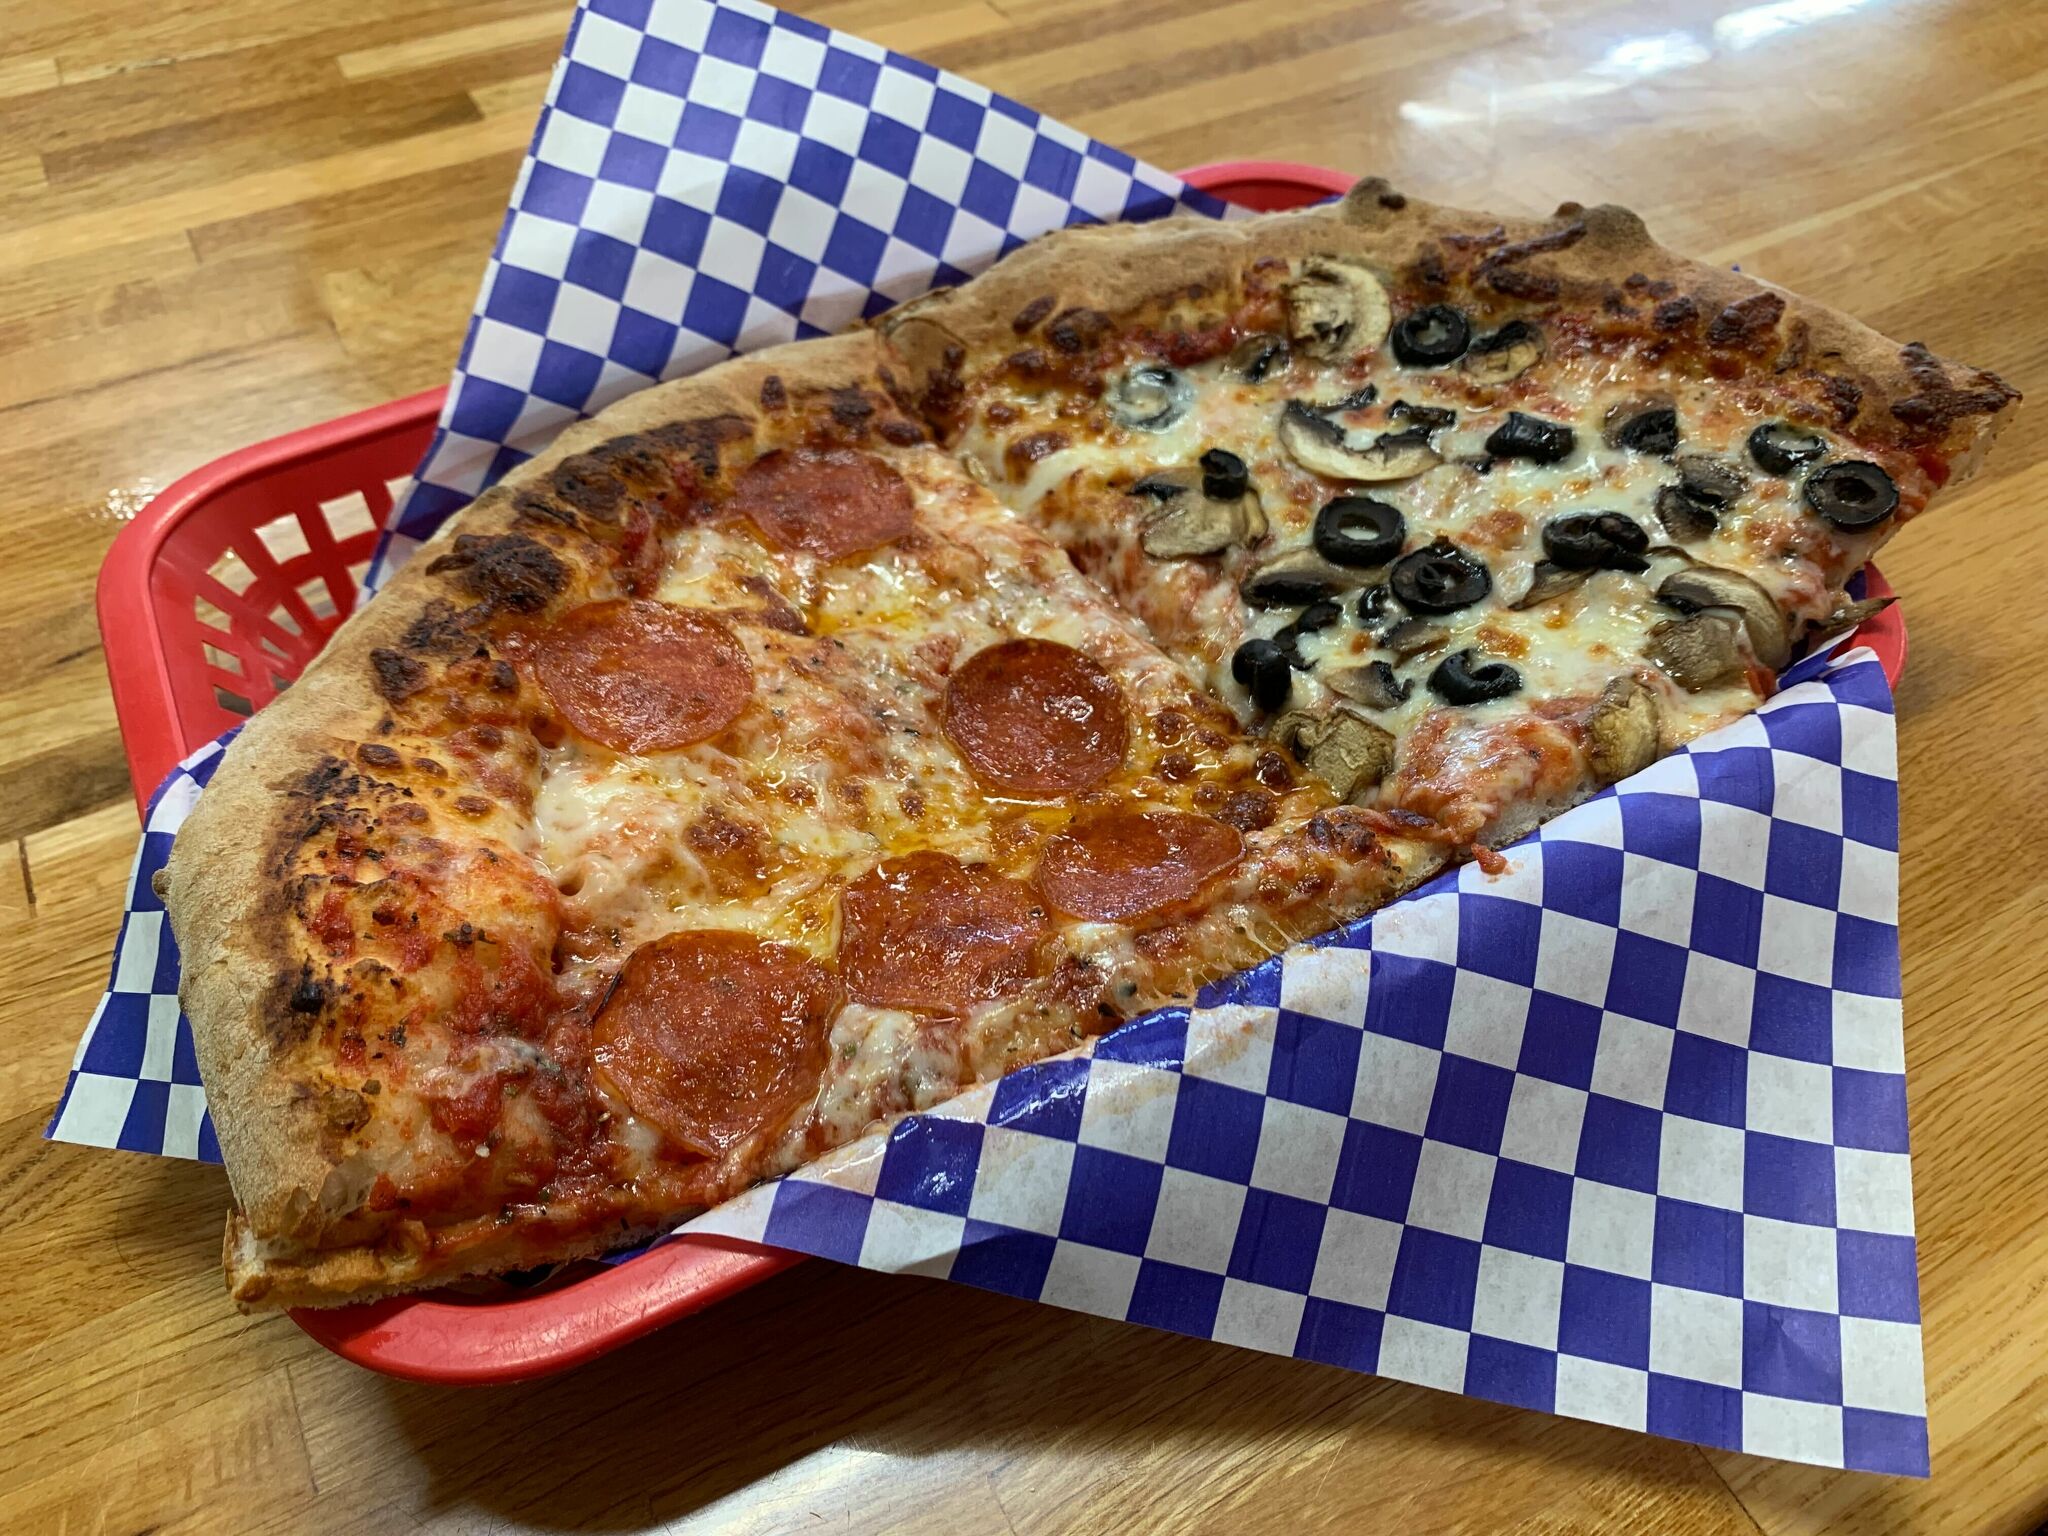 San Antonio’s Pizza Classics is offering an $8.49 two-piece special